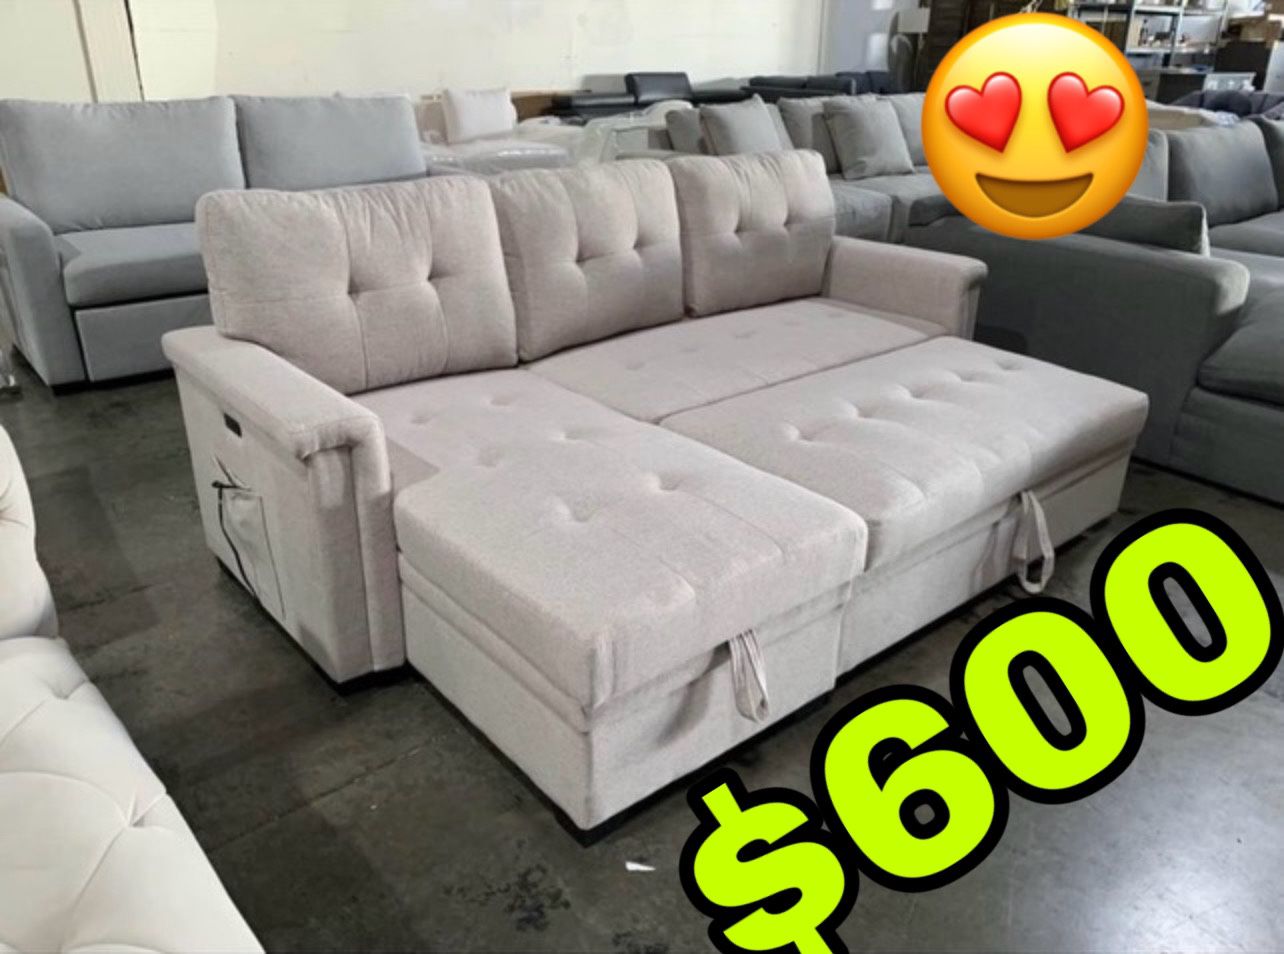 Beautiful New Sectional Sofa Bed W/ Reversible Storage Chaise & 2 USB Charging Ports in Light Gray Linen Only $600!!!